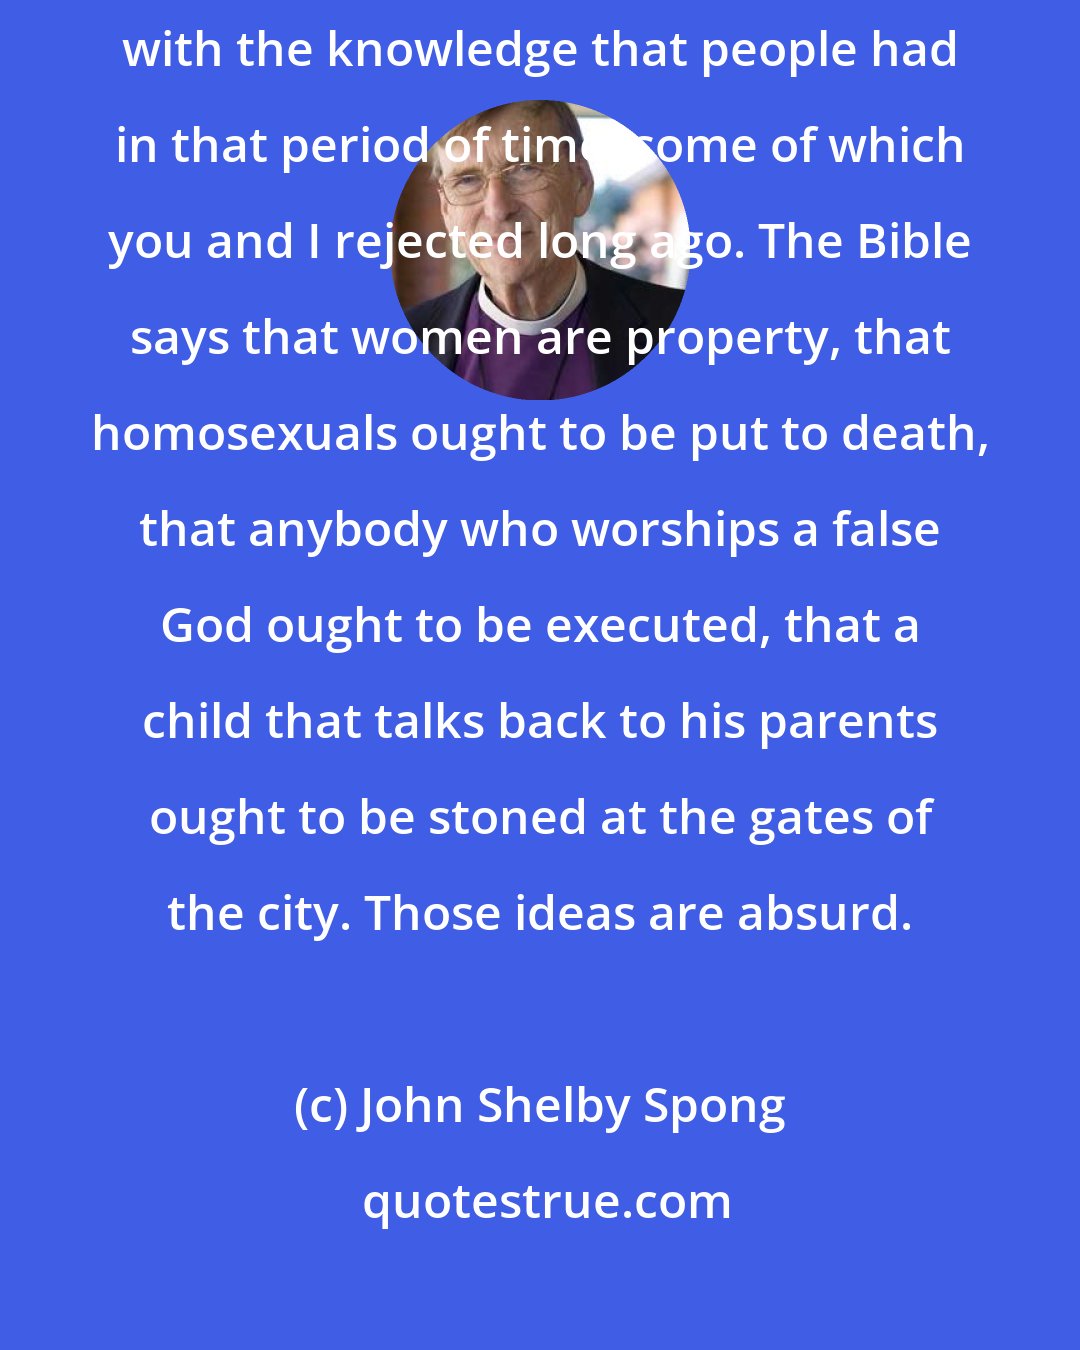 John Shelby Spong: The Bible was written between 3,000 and 2,000 years ago, and it's filled with the knowledge that people had in that period of time, some of which you and I rejected long ago. The Bible says that women are property, that homosexuals ought to be put to death, that anybody who worships a false God ought to be executed, that a child that talks back to his parents ought to be stoned at the gates of the city. Those ideas are absurd.